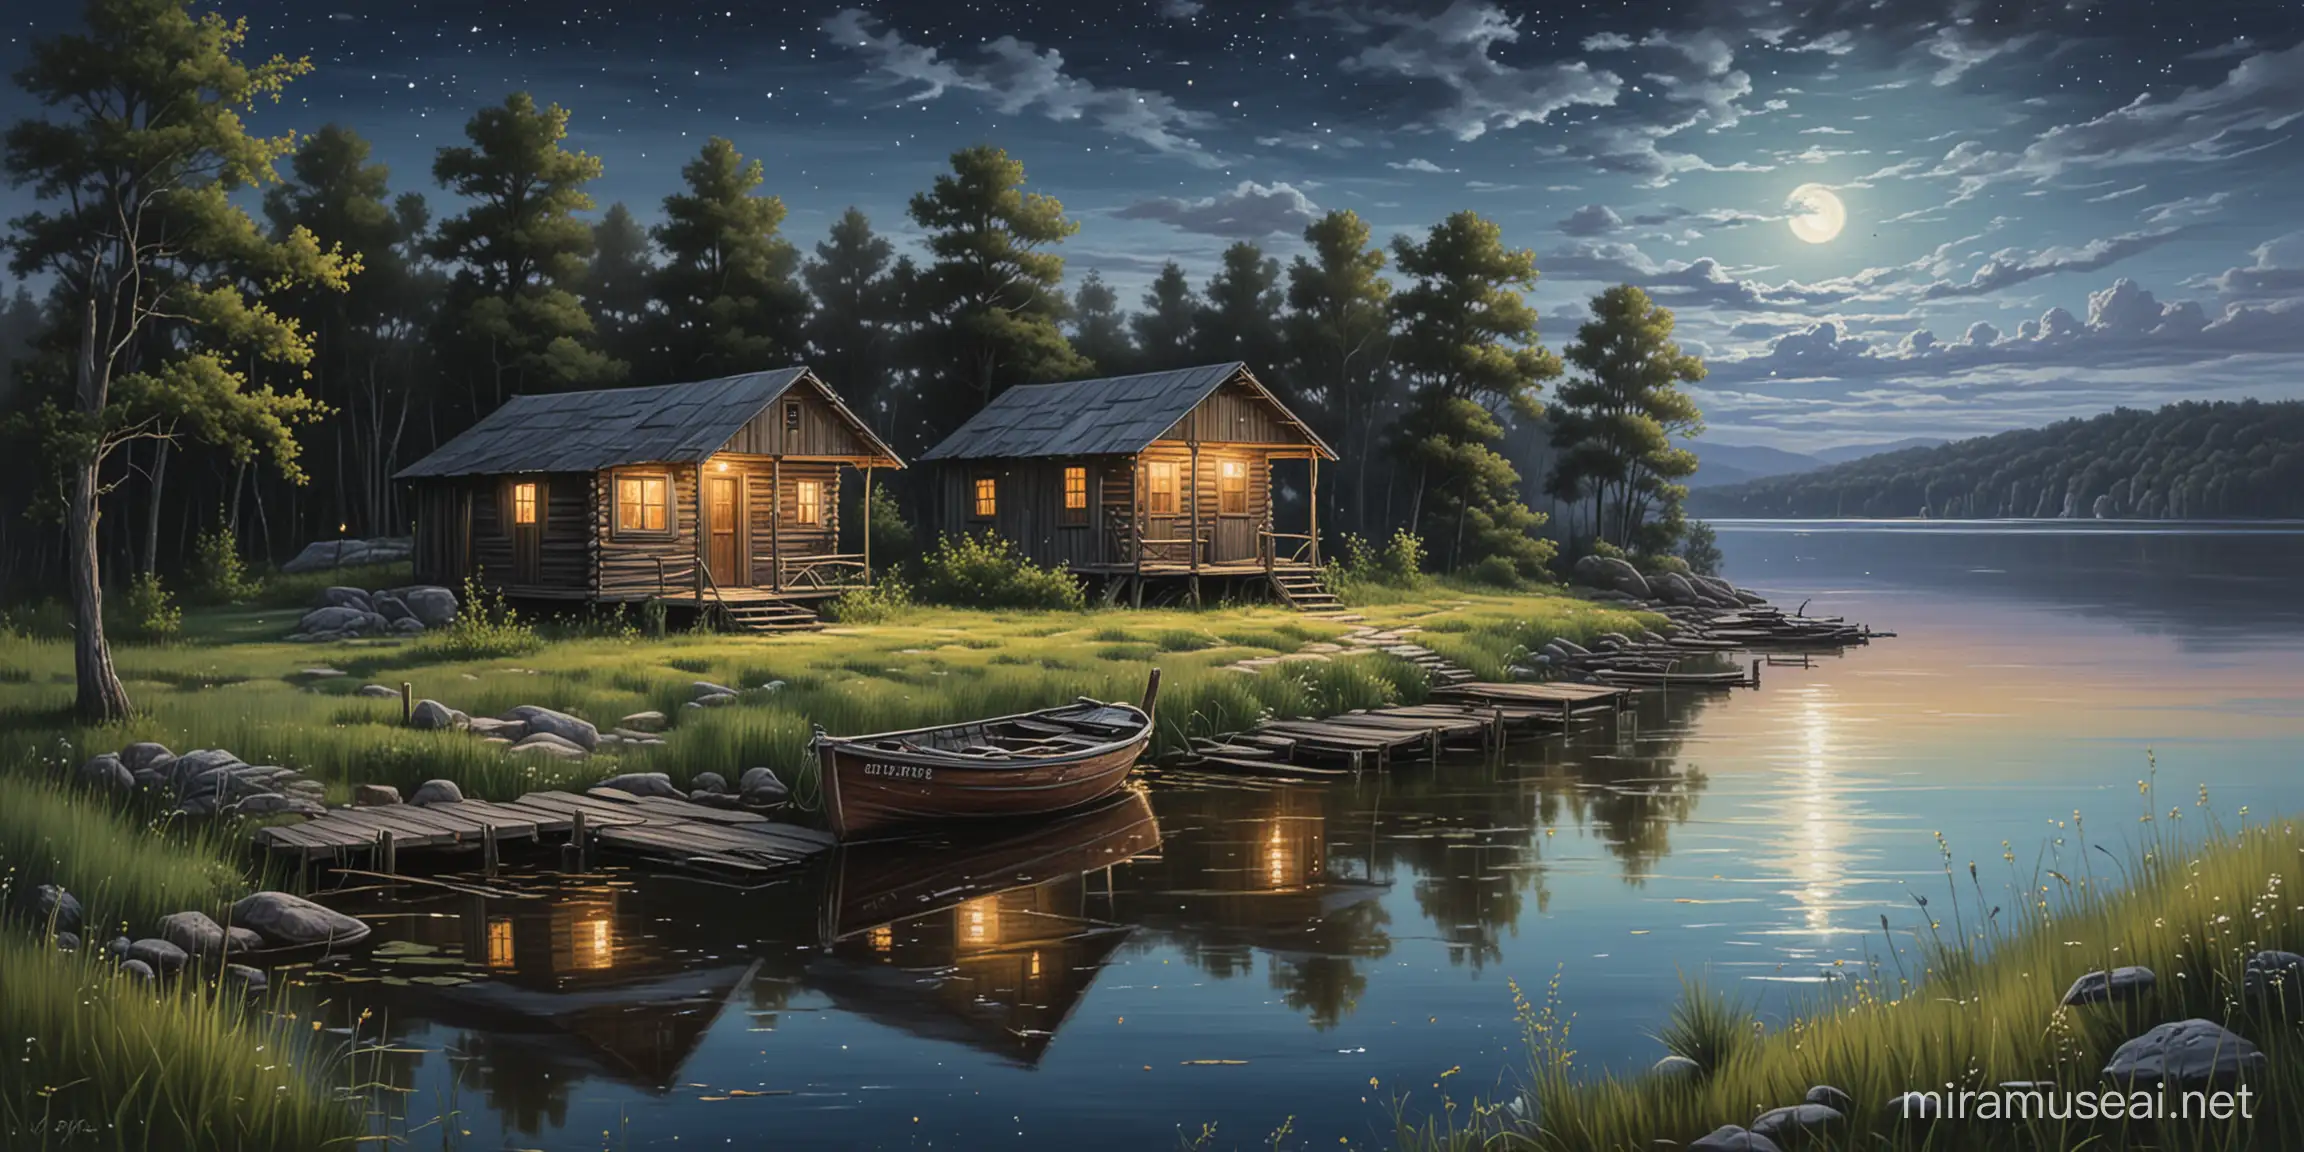 oil painting, 4 old cabins,  moonlight, stars, fireflies, Clear sky, few clouds, rock shoreline, old pier and attached old boat, weeds in lake, grassy area